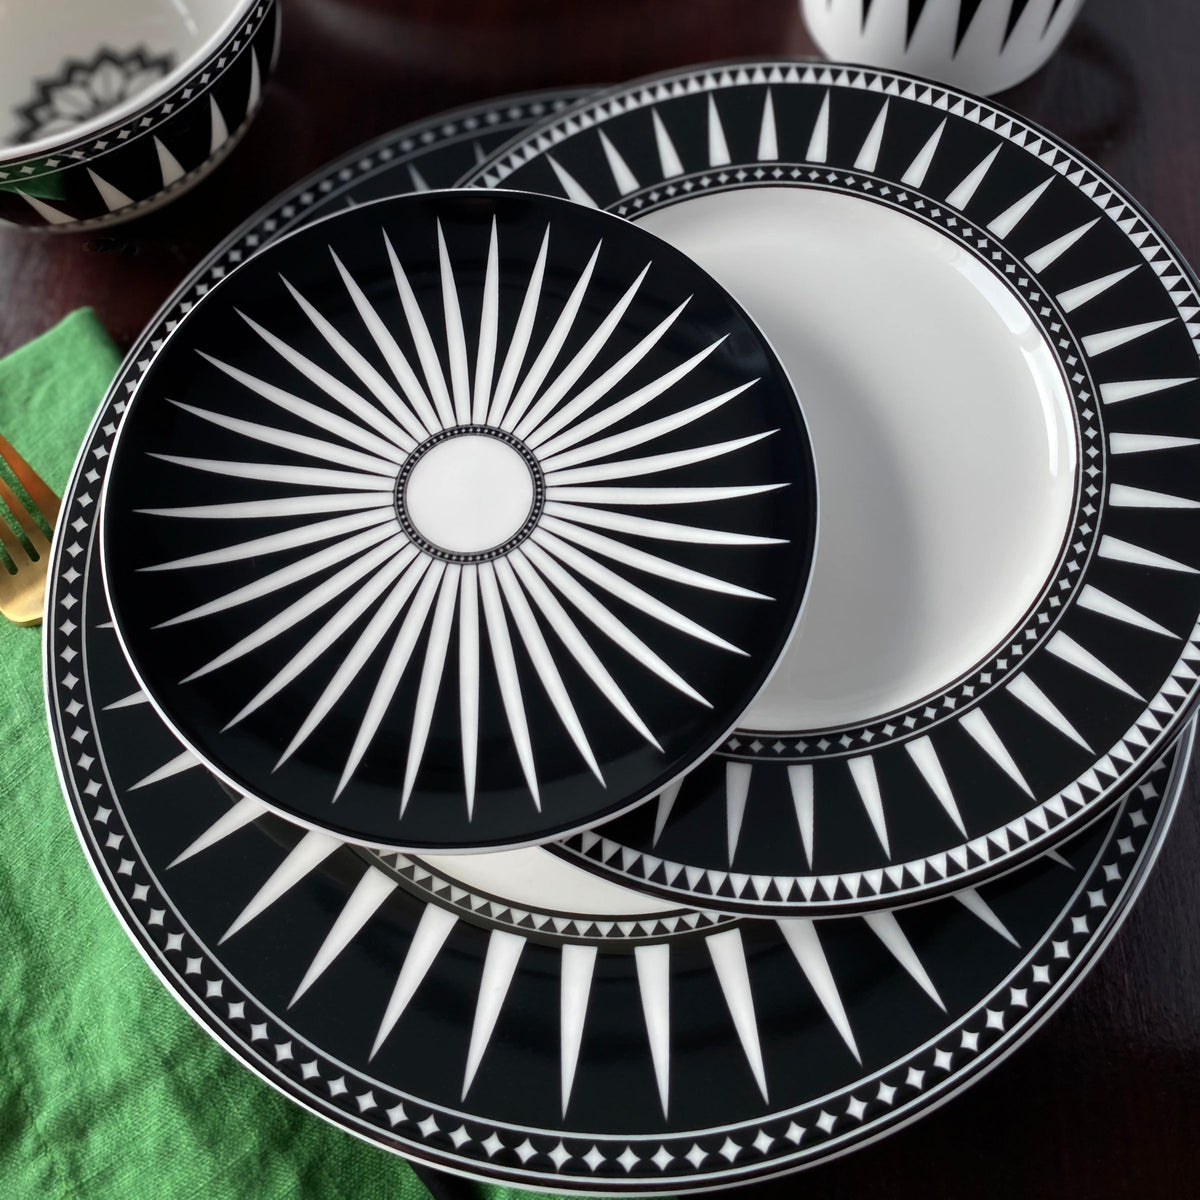 Stacked Marrakech Small Plates with a black and white geometric starburst design on a dark surface, accompanied by a green cloth and a gold fork. These high-fired porcelain pieces from Caskata Artisanal Home evoke the charm of Marrakech.